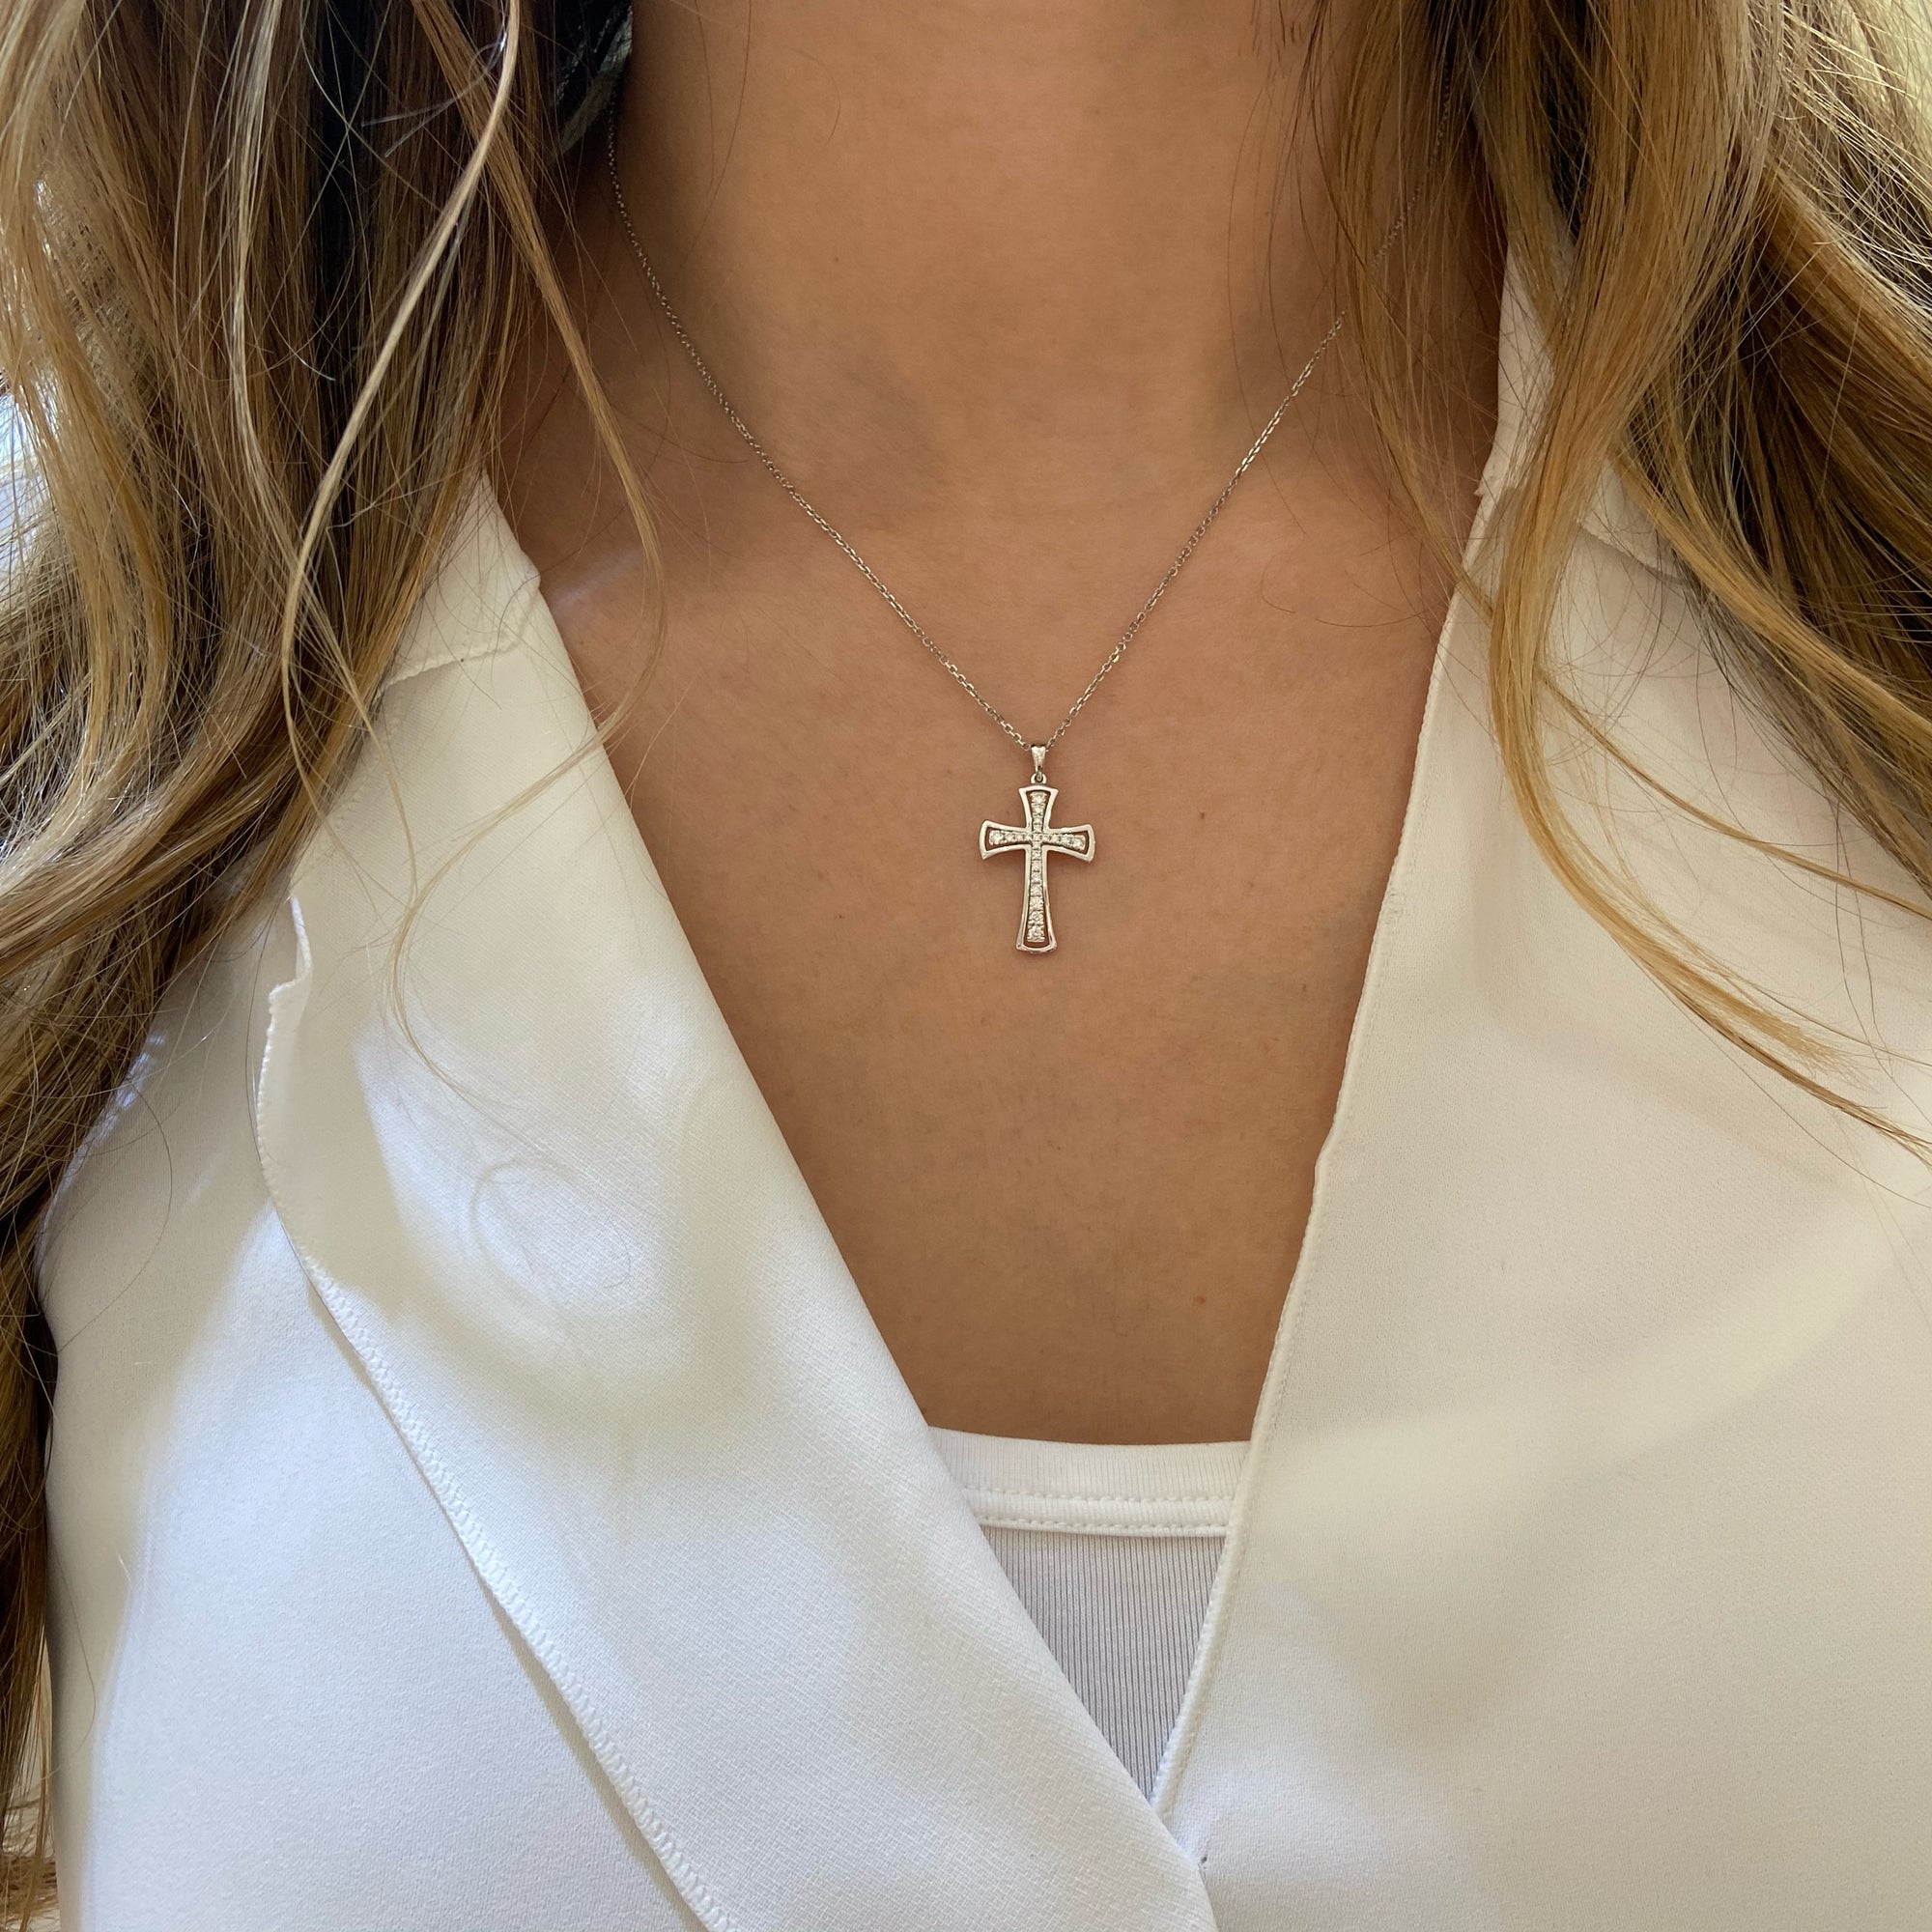 Diamond Cross Pendant Necklace with Gold Halo  An ideal christening, communion, confirmation, birthday, or holiday gift!  -14K gold weighing 3.35 grams  -21 round diamonds totaling 0.25 carats.